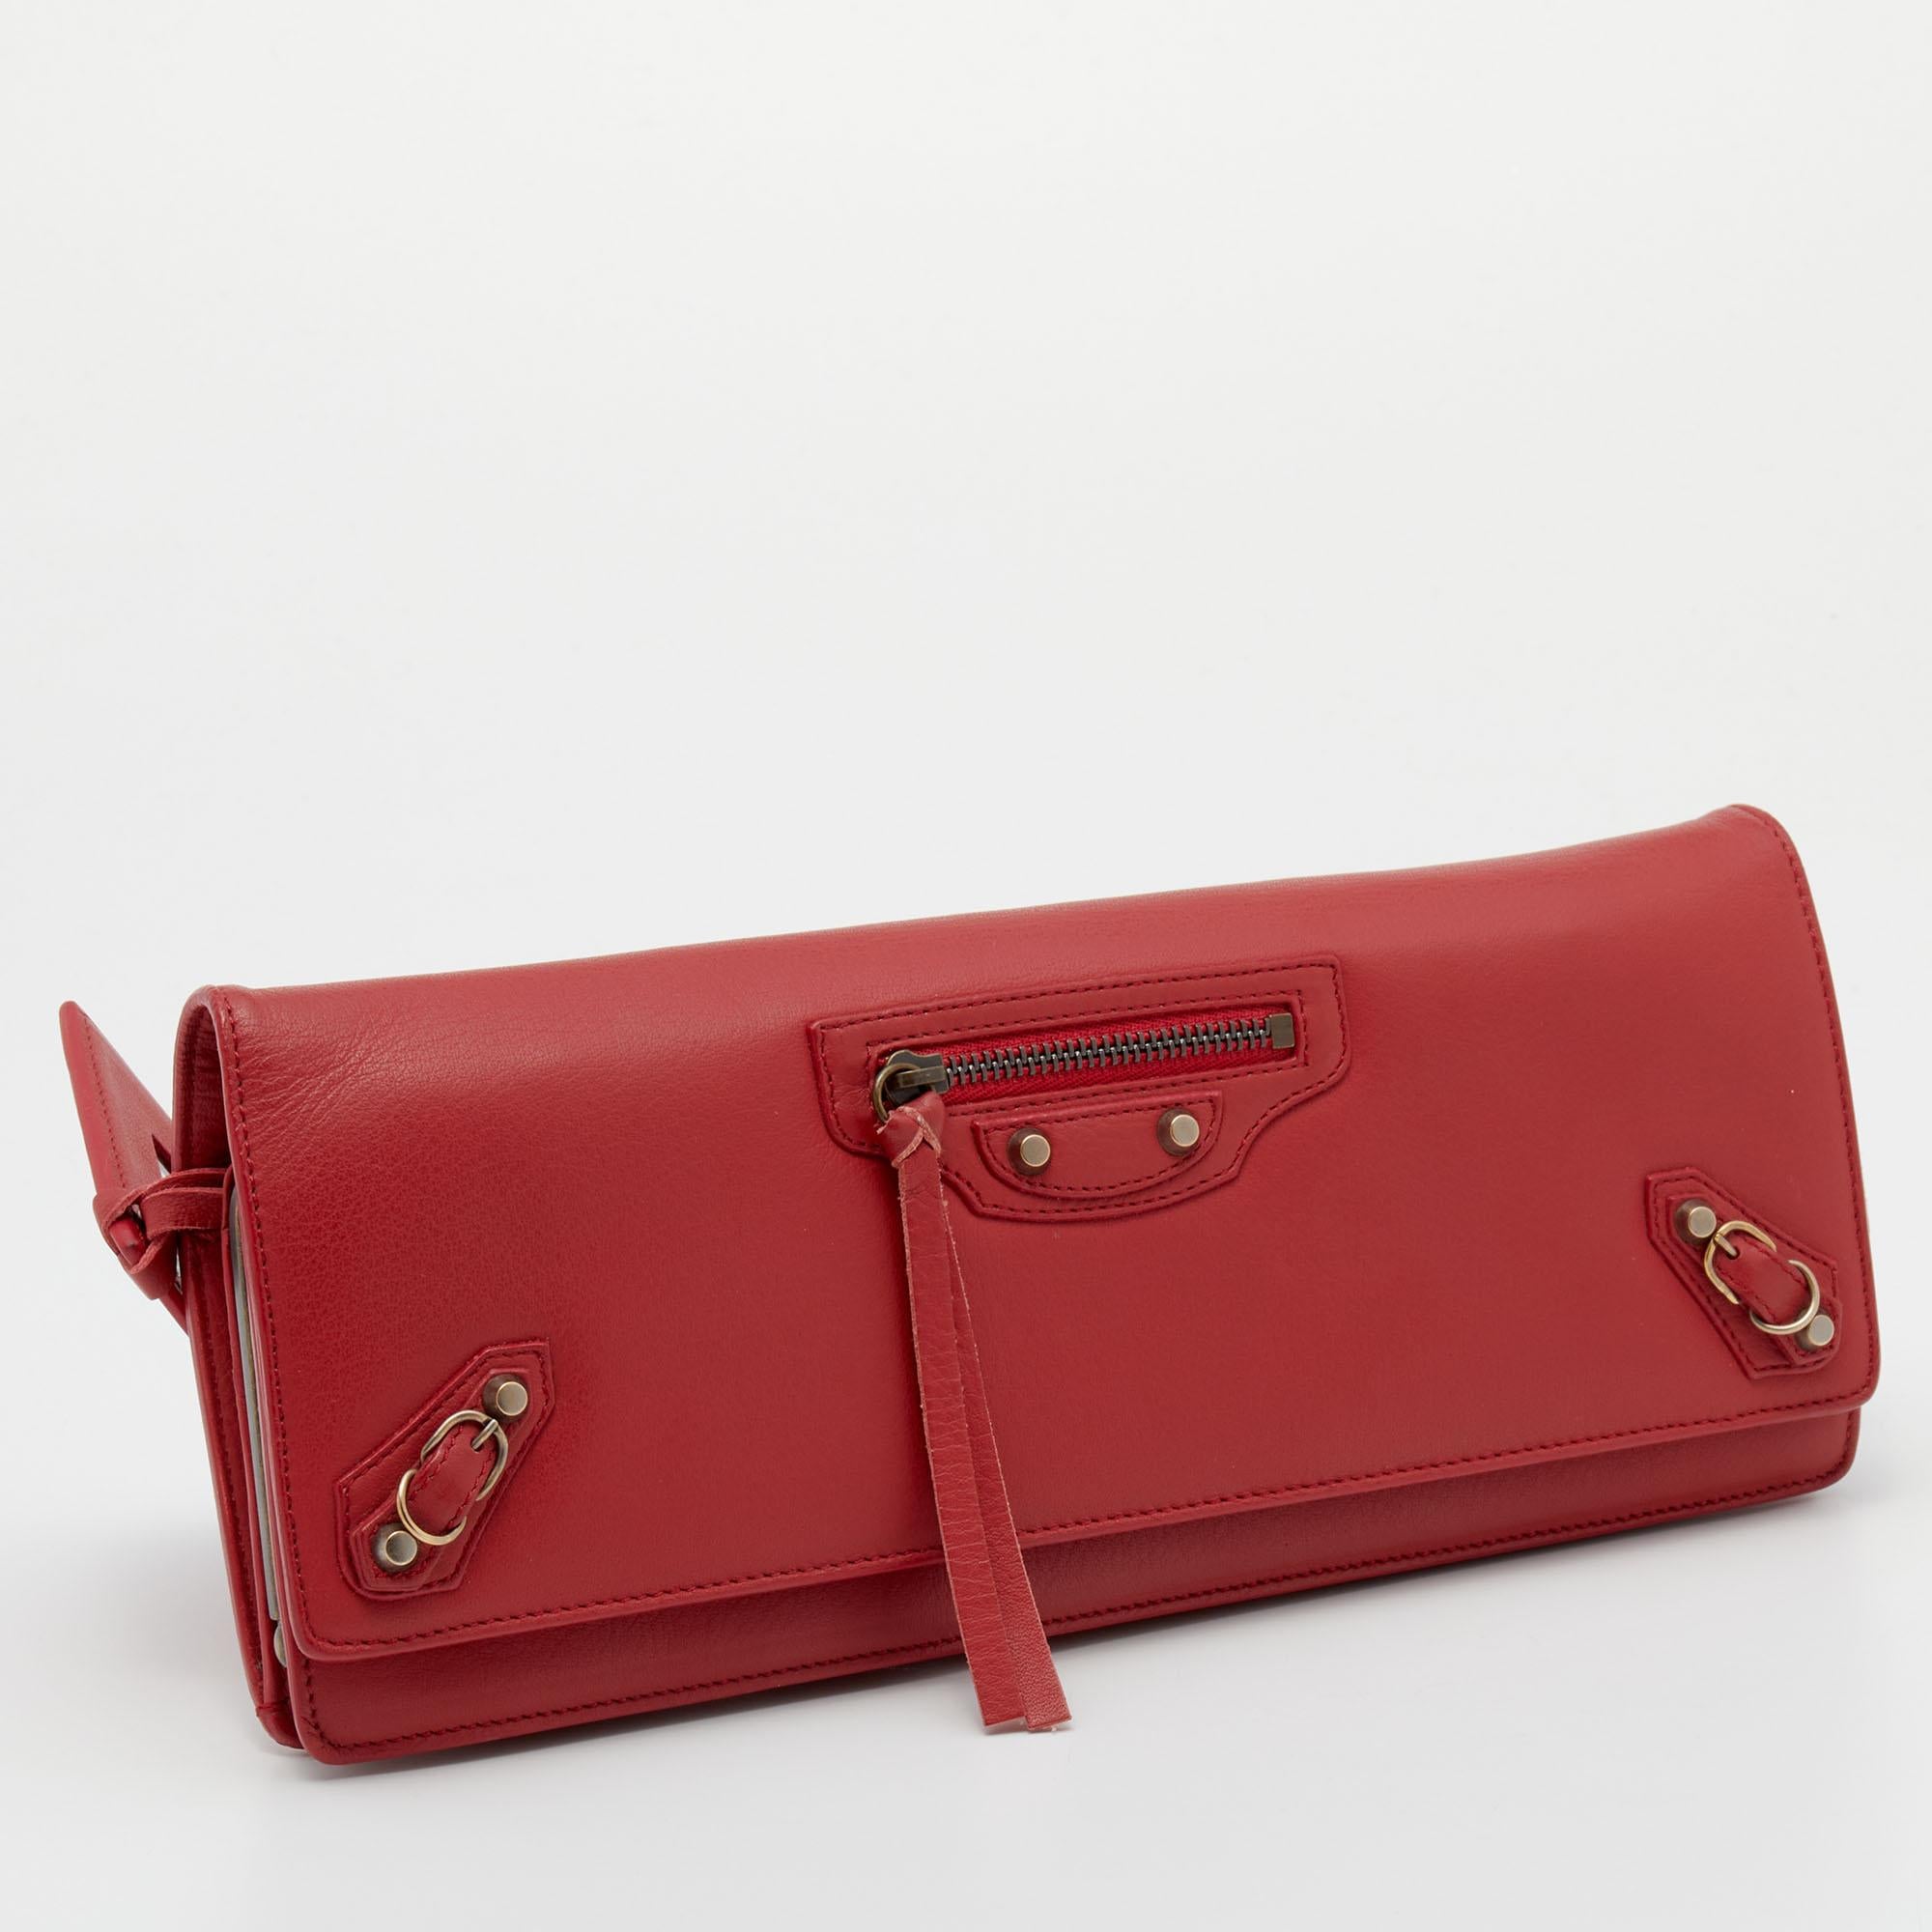 red leather clutch